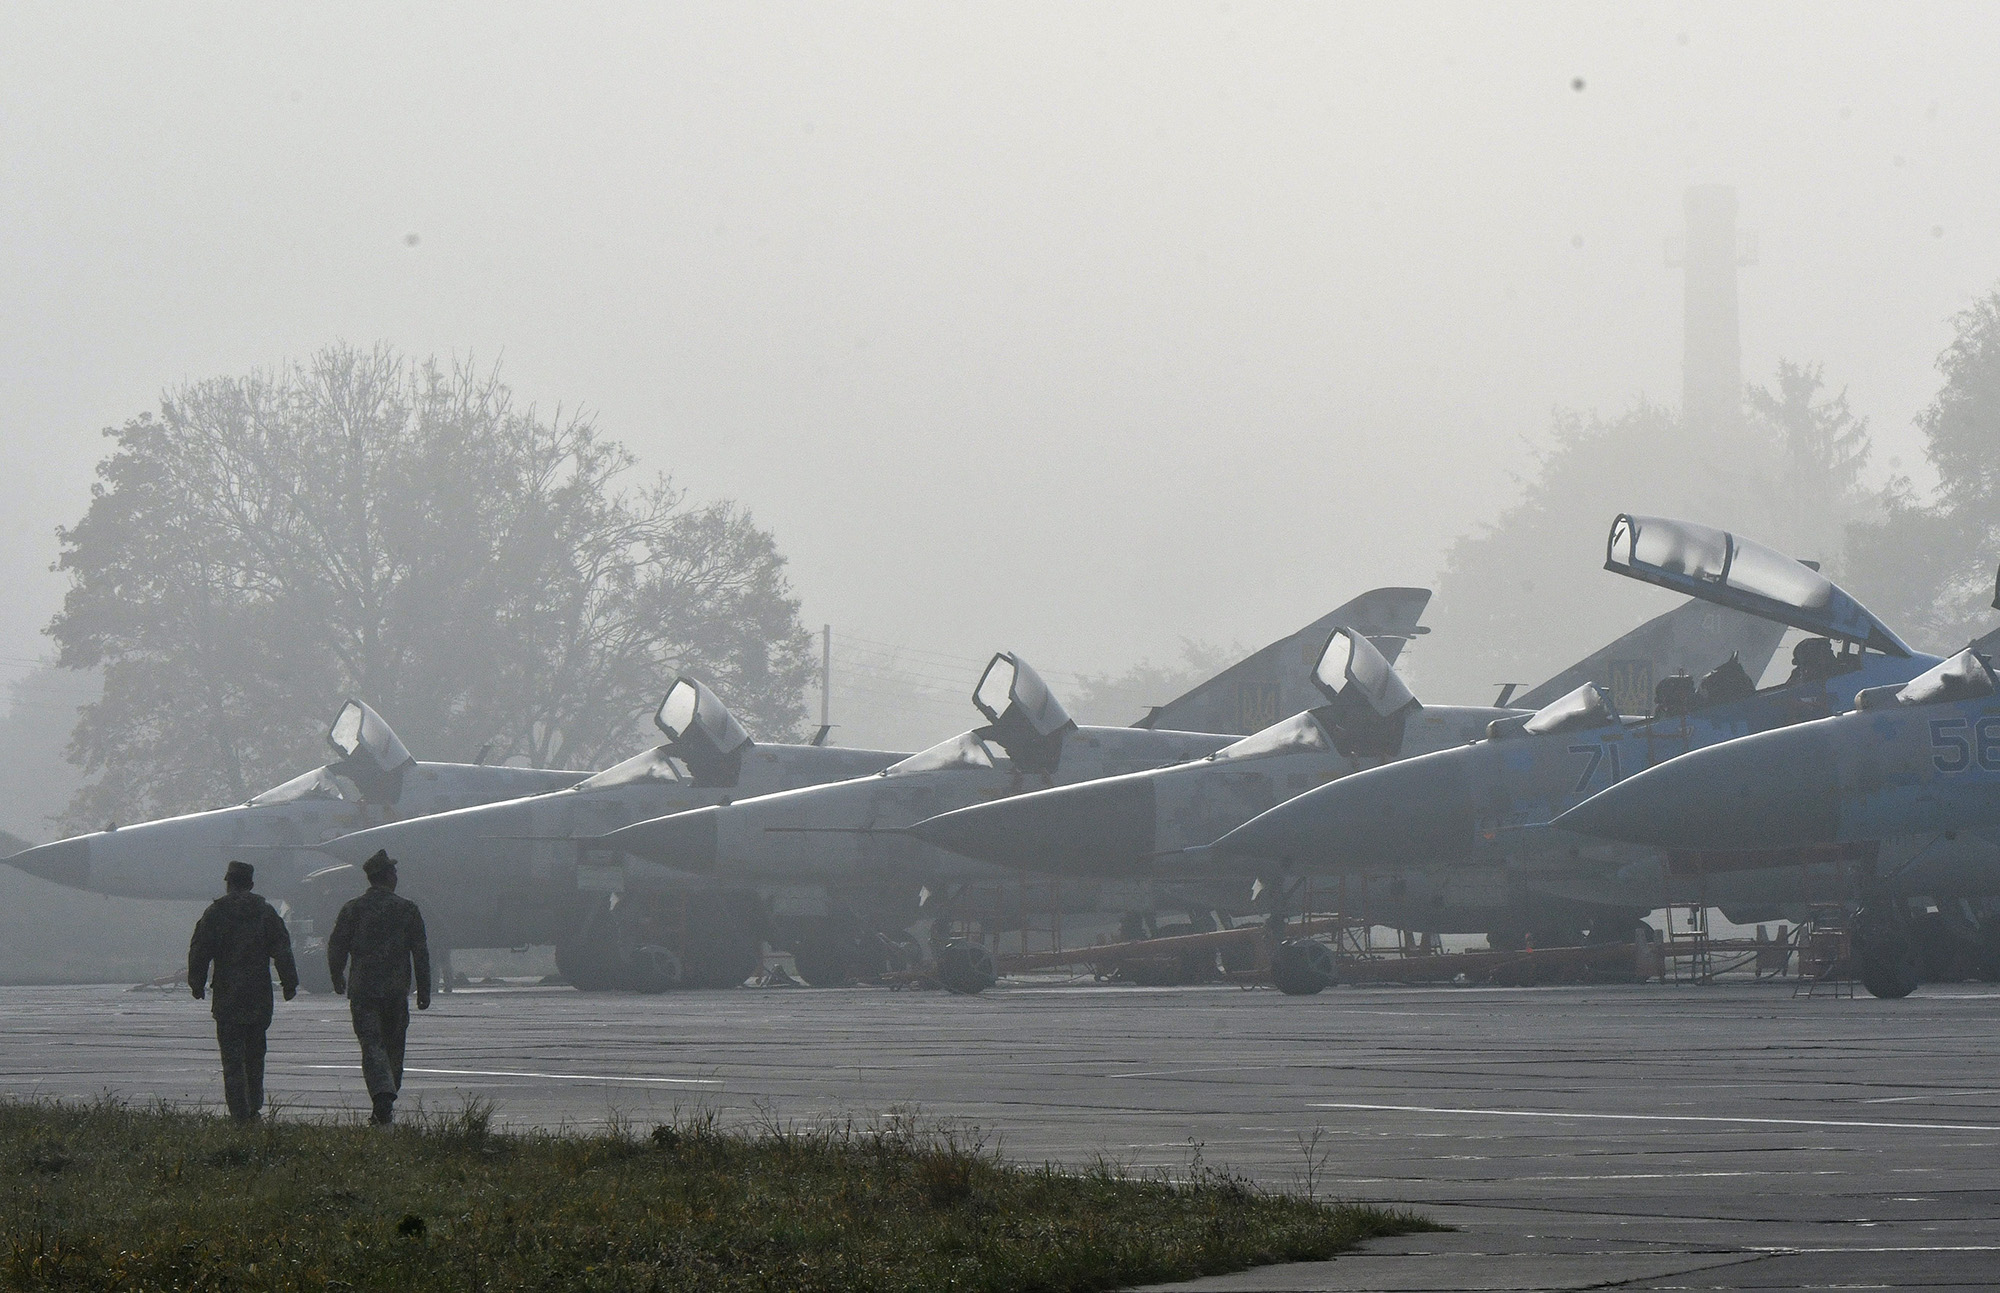 Ukrainian servicemen walk in front of Ukrainian SU-24 and SU-27 military planes during an air force exercises on Starokostyantyniv military airbase on October 12, 2018.